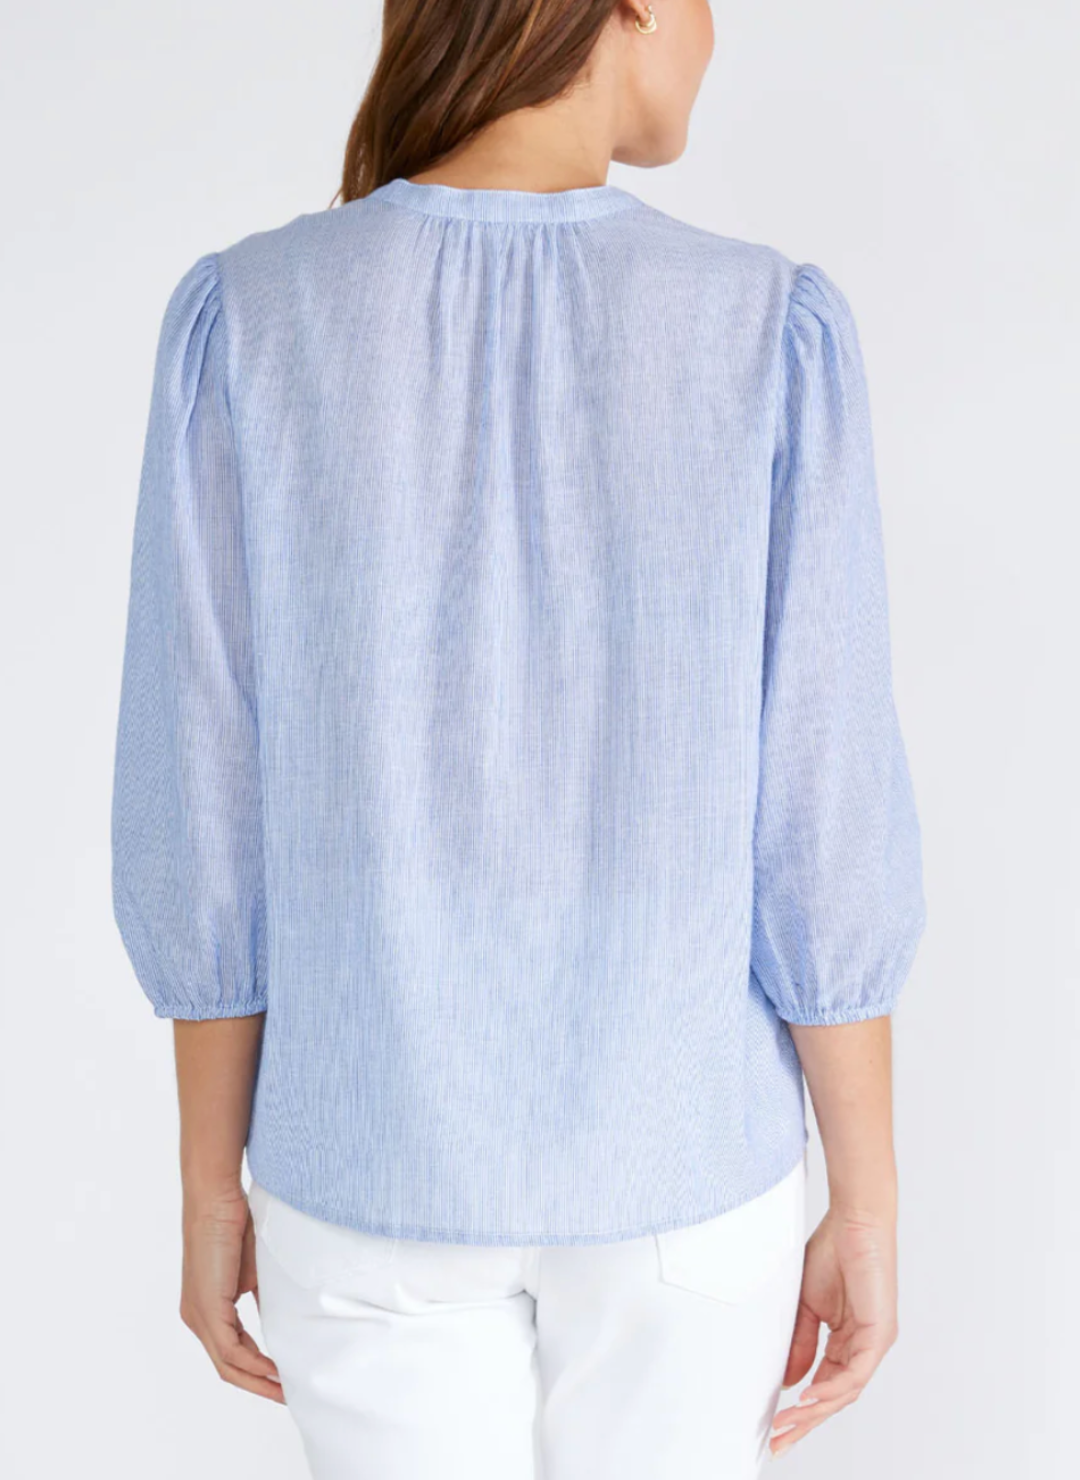 Back view of model wearing LS Cloudy Skies Top with 3/4 length sleeve and elastic cuff. Features pintuck details.